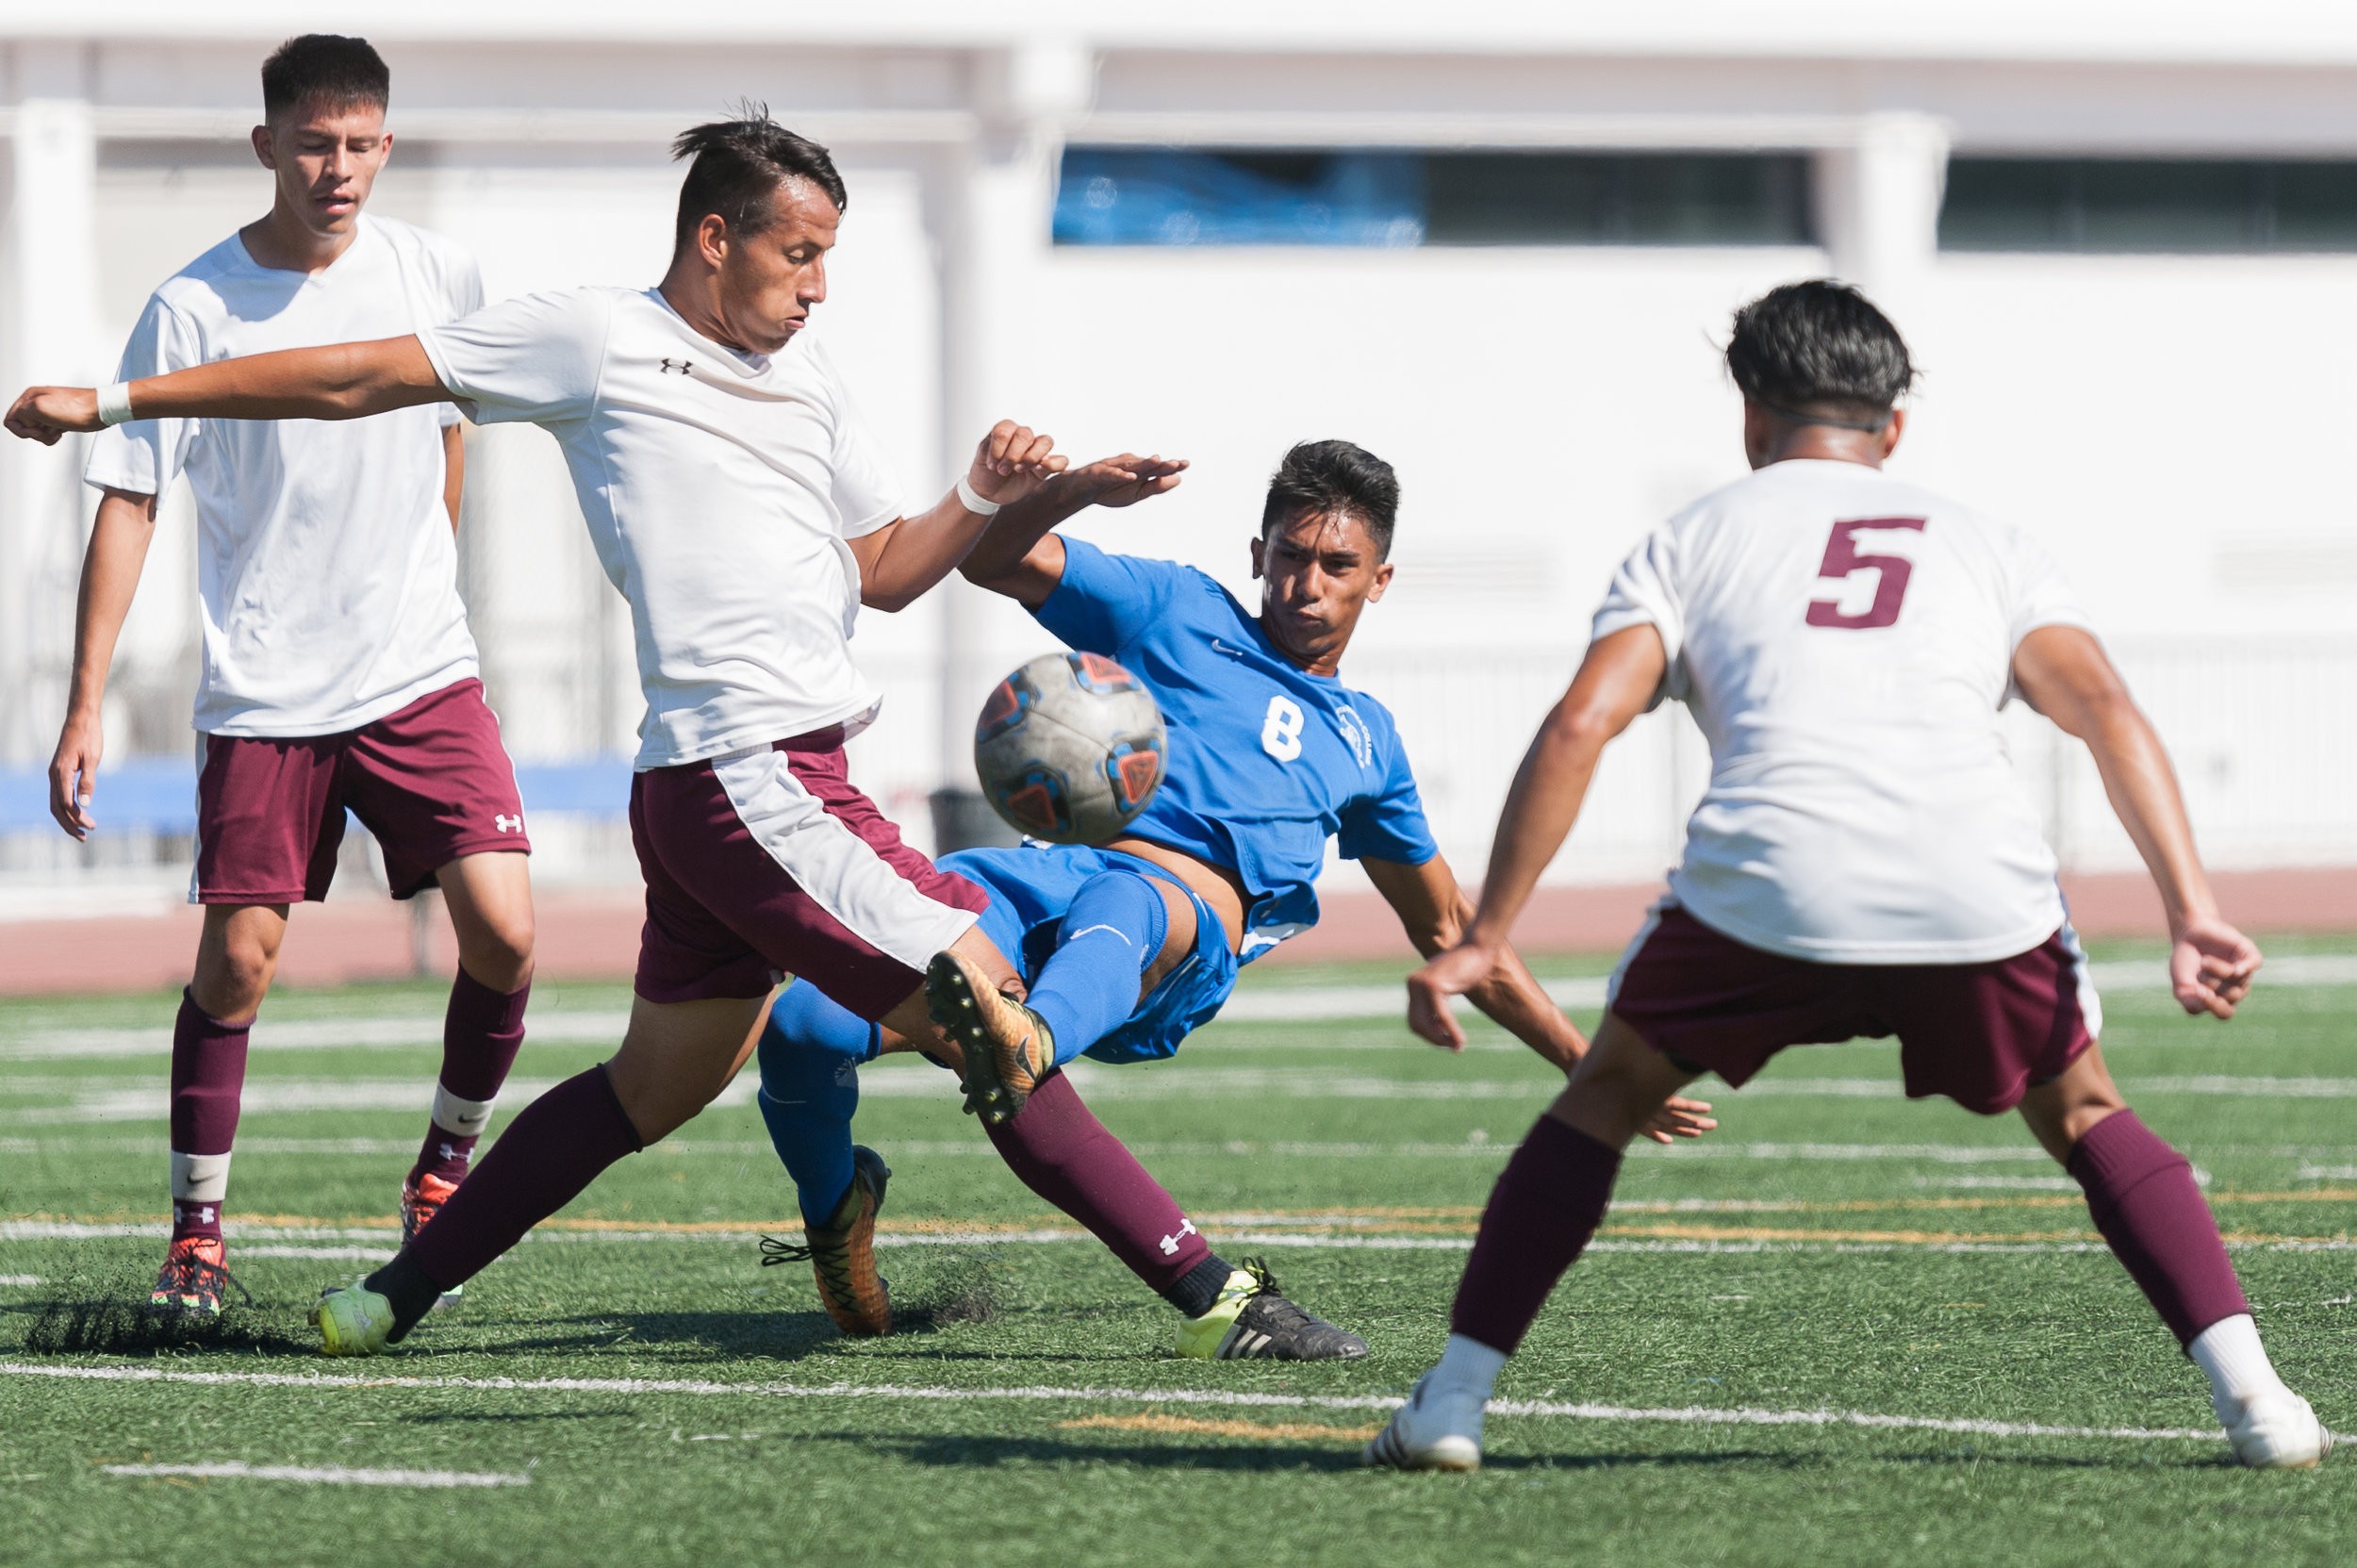  Forward Andy Naidu (8) of Santa Monica College makes a pass through several Victor Valley players. The Santa Monica College Corsairs won the game 2-0 against the Victor Valley Rams. The match was held at the Corsair Stadium at Santa Monica College i